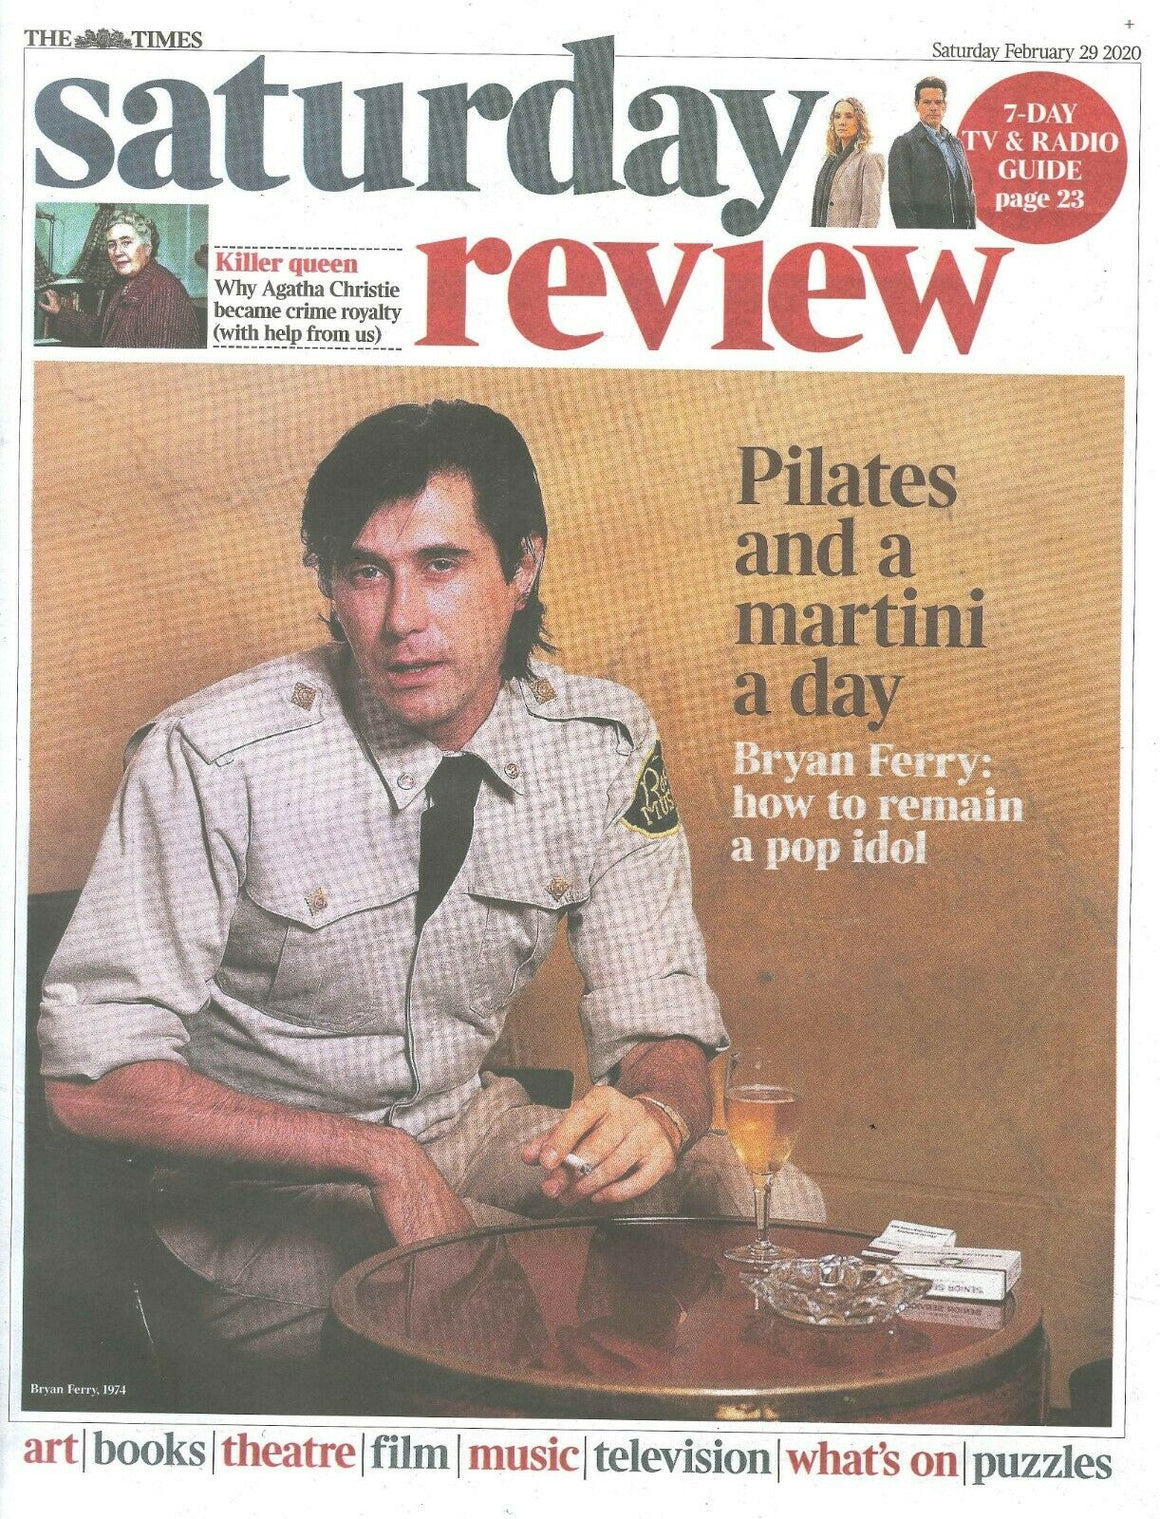 UK Times Review February 2020: BRYAN FERRY (Roxy Music) Interview